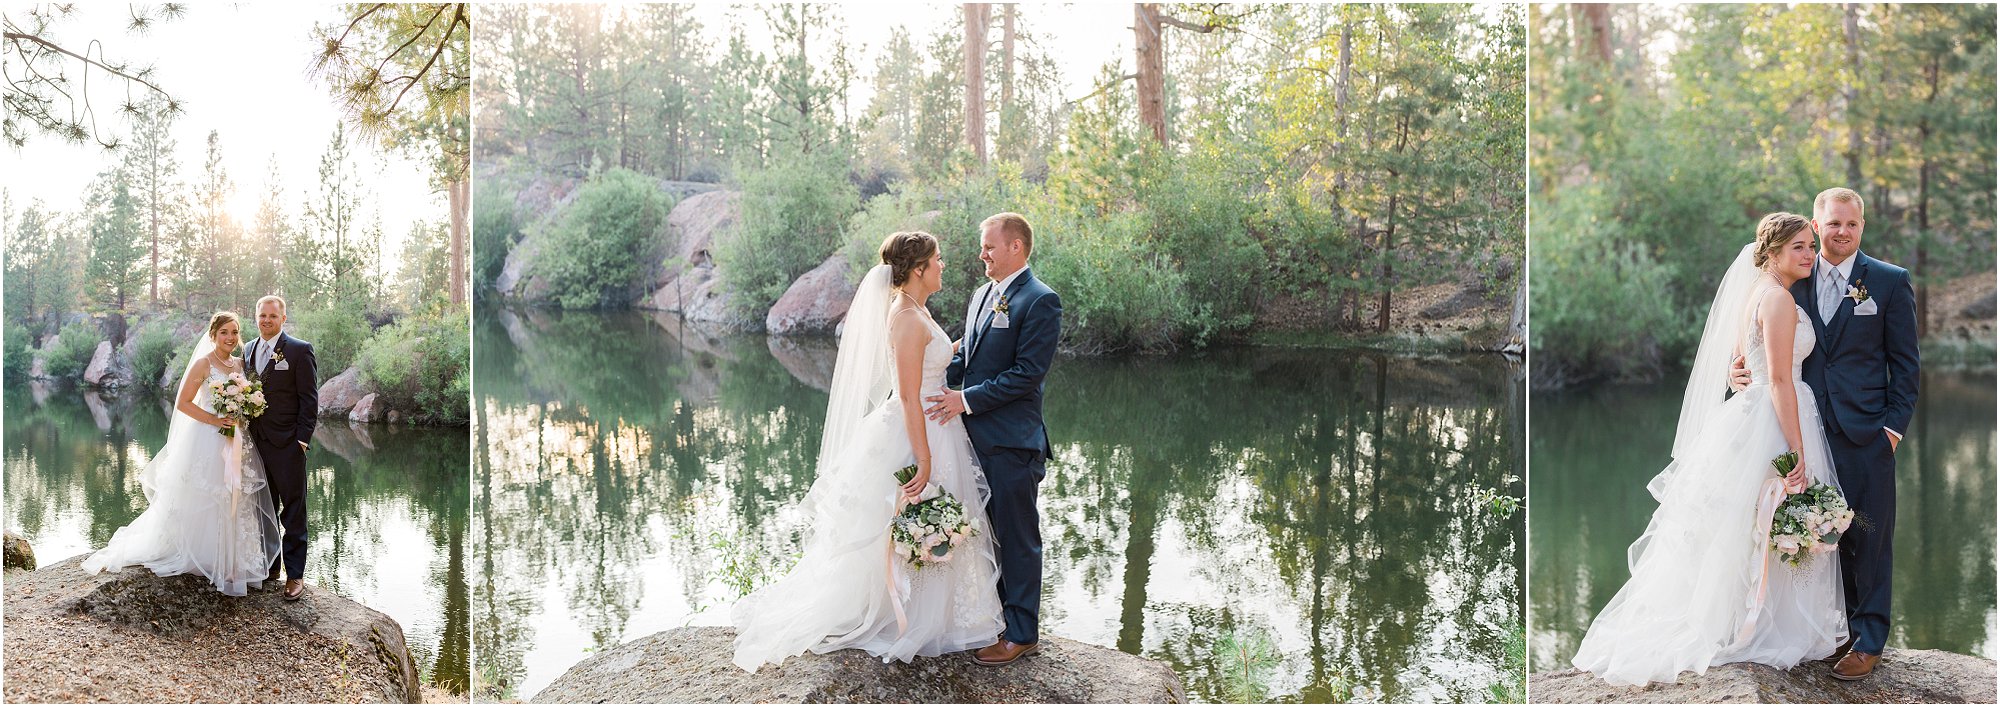 The golden evening light behind the tall pines and in front of the still pond provides some gorgeous portraits of the wedding couple at Rock Springs Ranch in Bend, OR. | Erica Swantek Photography